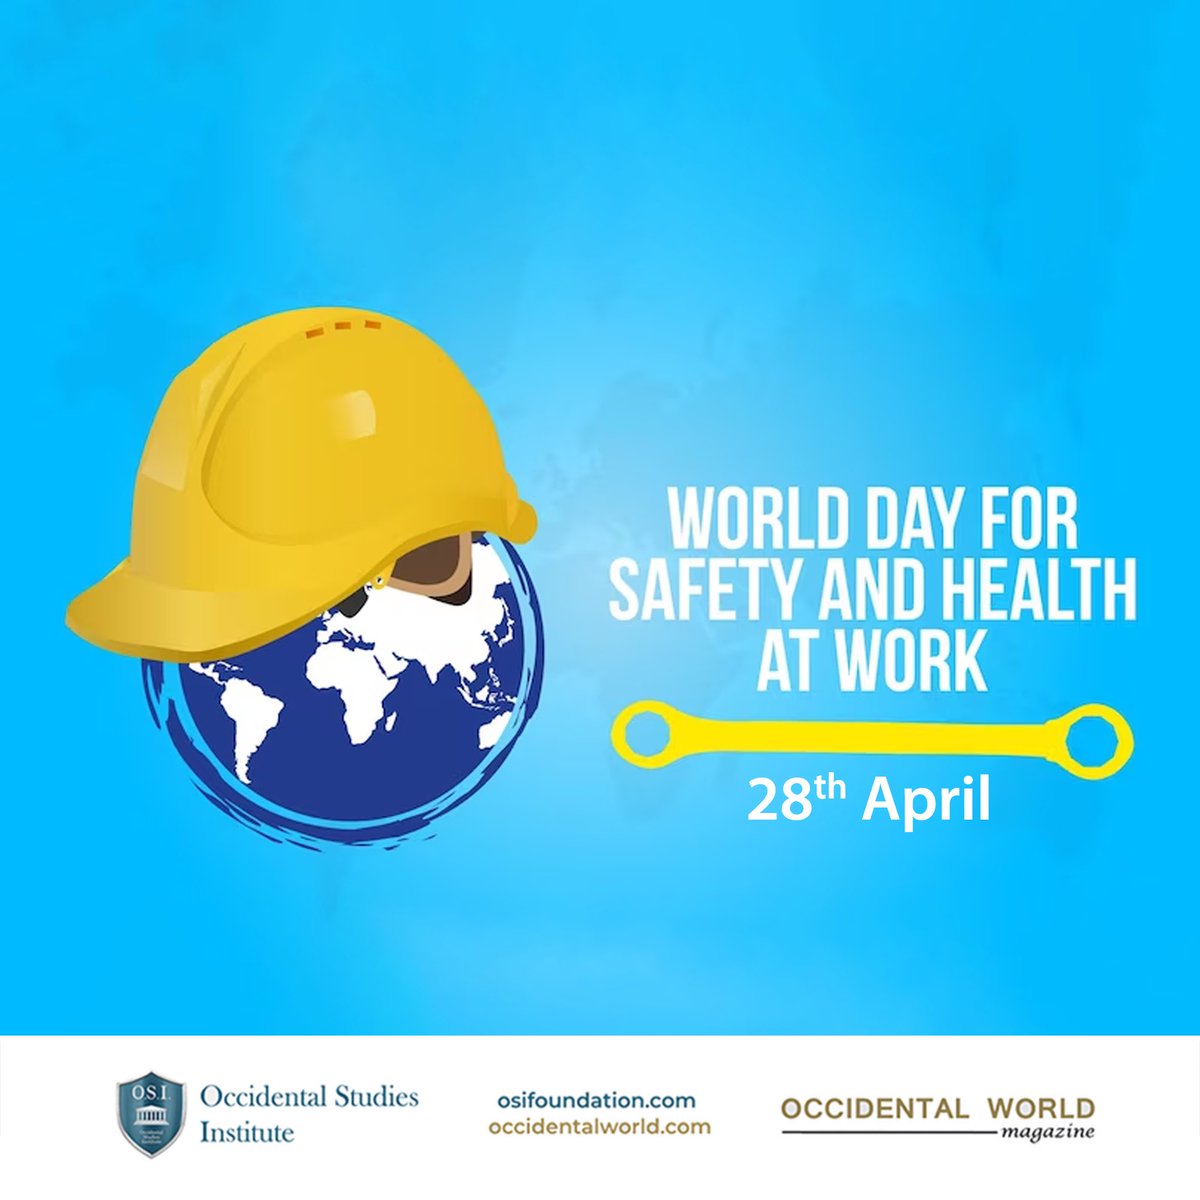 World day for Safety and Health at Work!

#osi #osifoundation #occidentialstudiesinstitute #earthday  #bleedingdisorders #blooddisorder #uk #us #spain #world #vision #ourvision #haemophiliaawareness #healthyfood #study #institute #research #studymotivation #goodhealth #learning